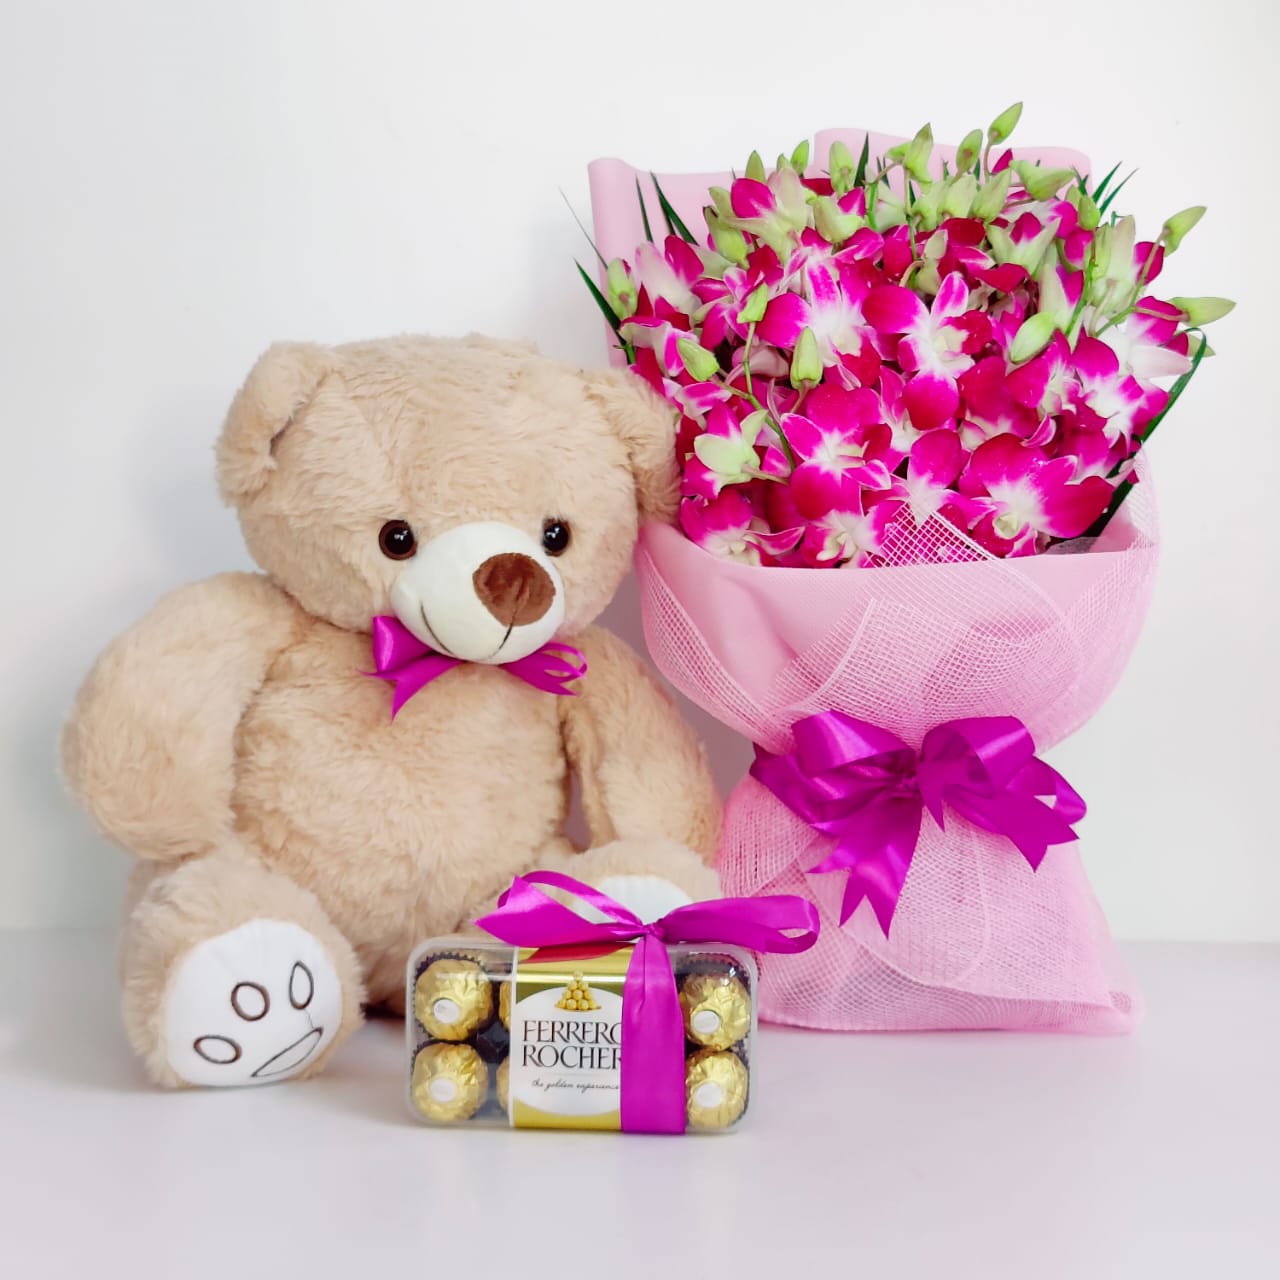 Orchid Bouquet with Teddy and Ferrero Rocher